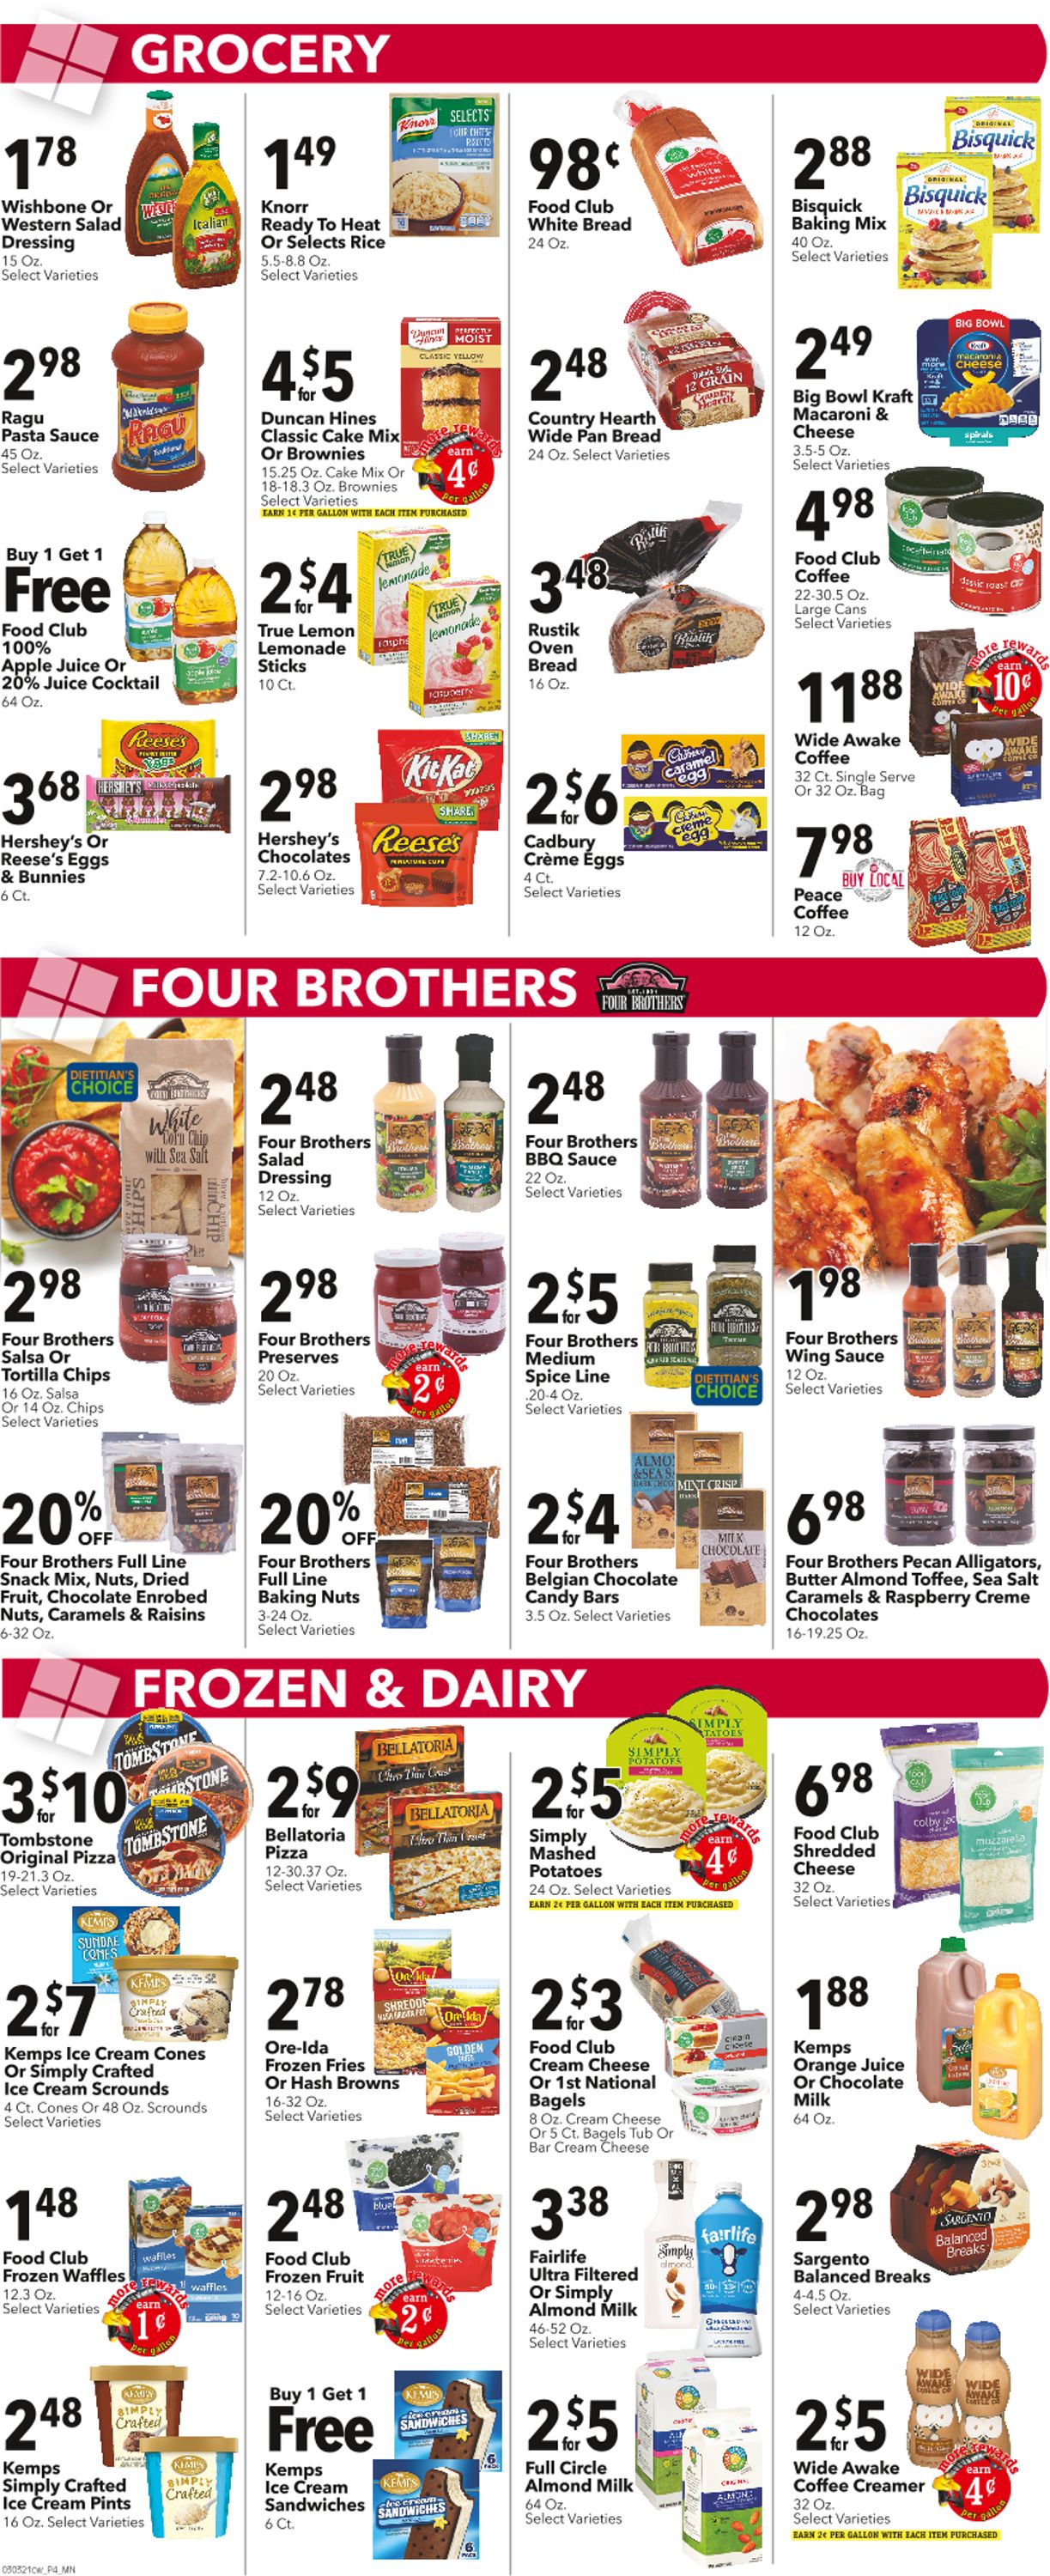 Cash Wise Weekly Ad Circular - valid 03/03-03/09/2021 (Page 4)